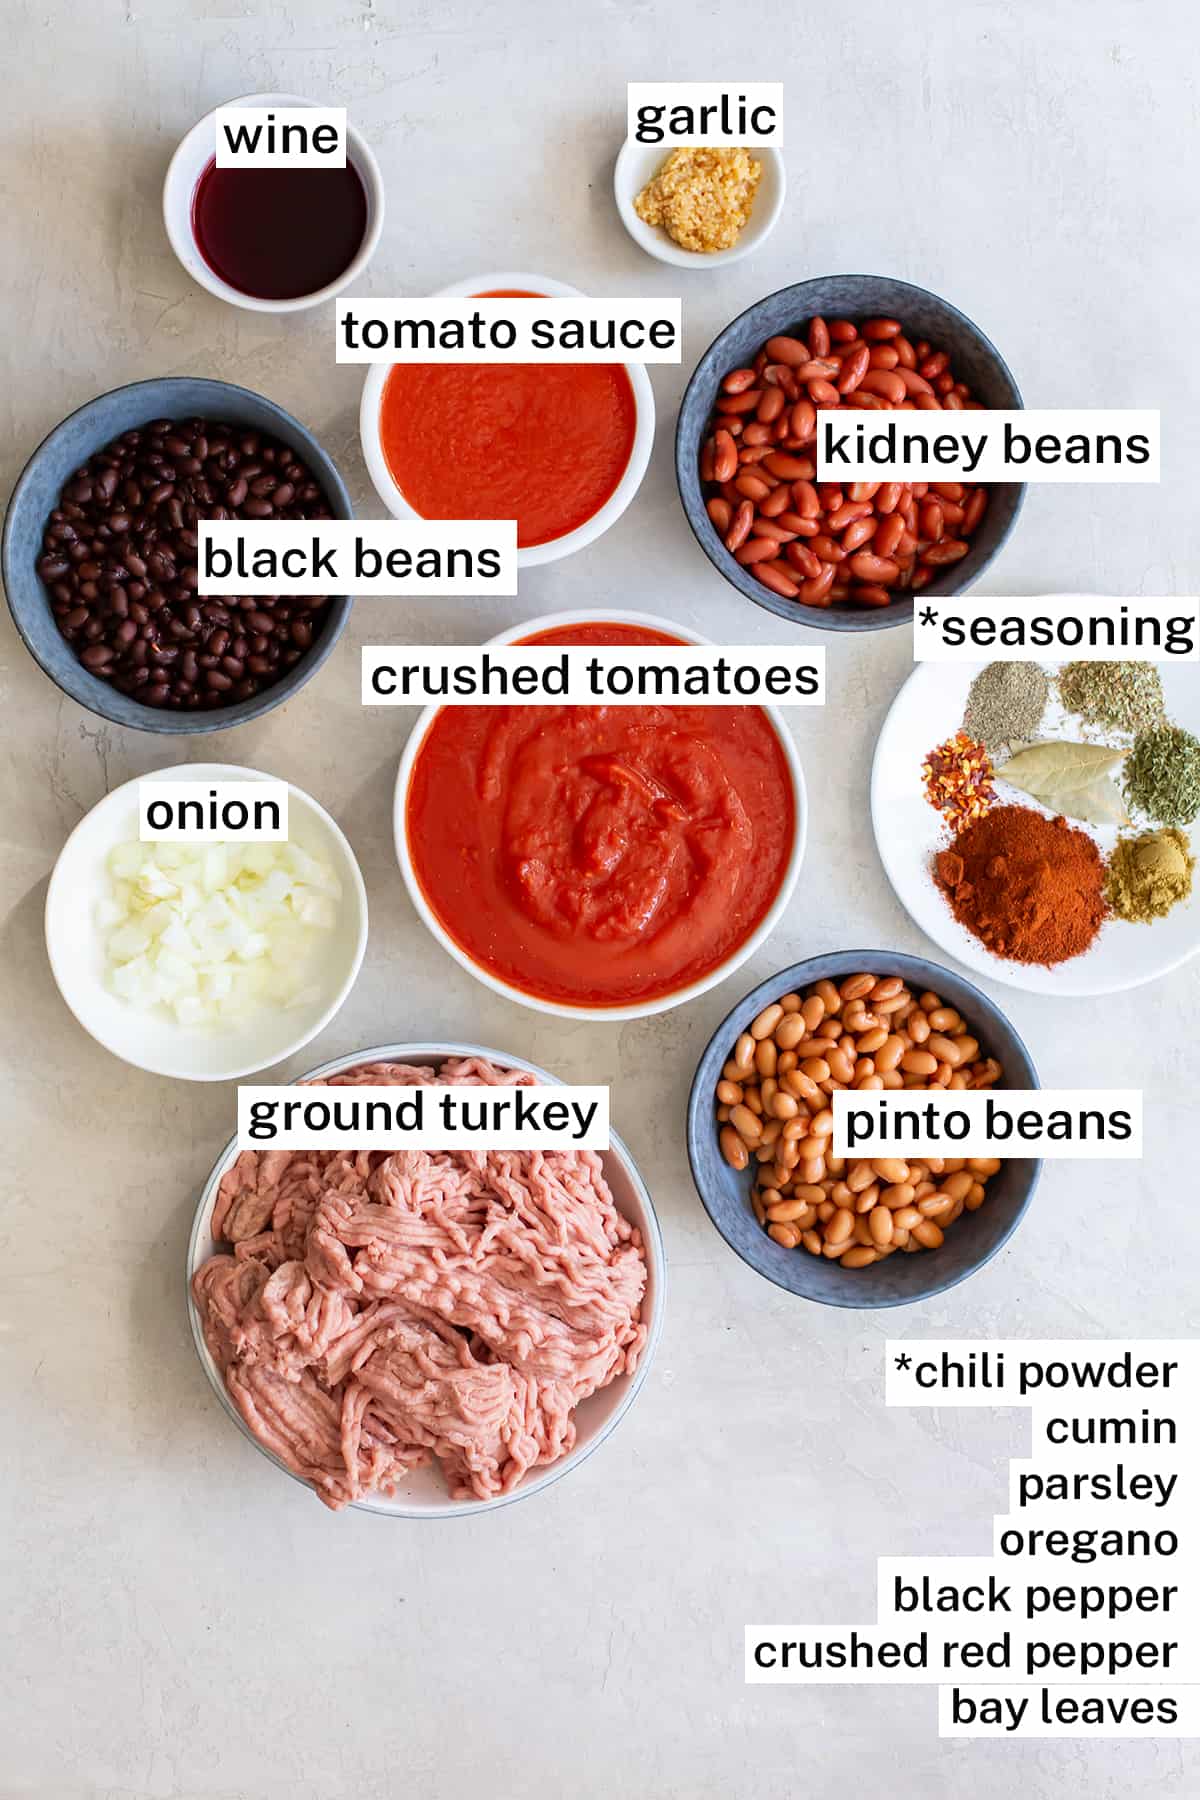 The ingredients for Turkey Chili with text overlay.